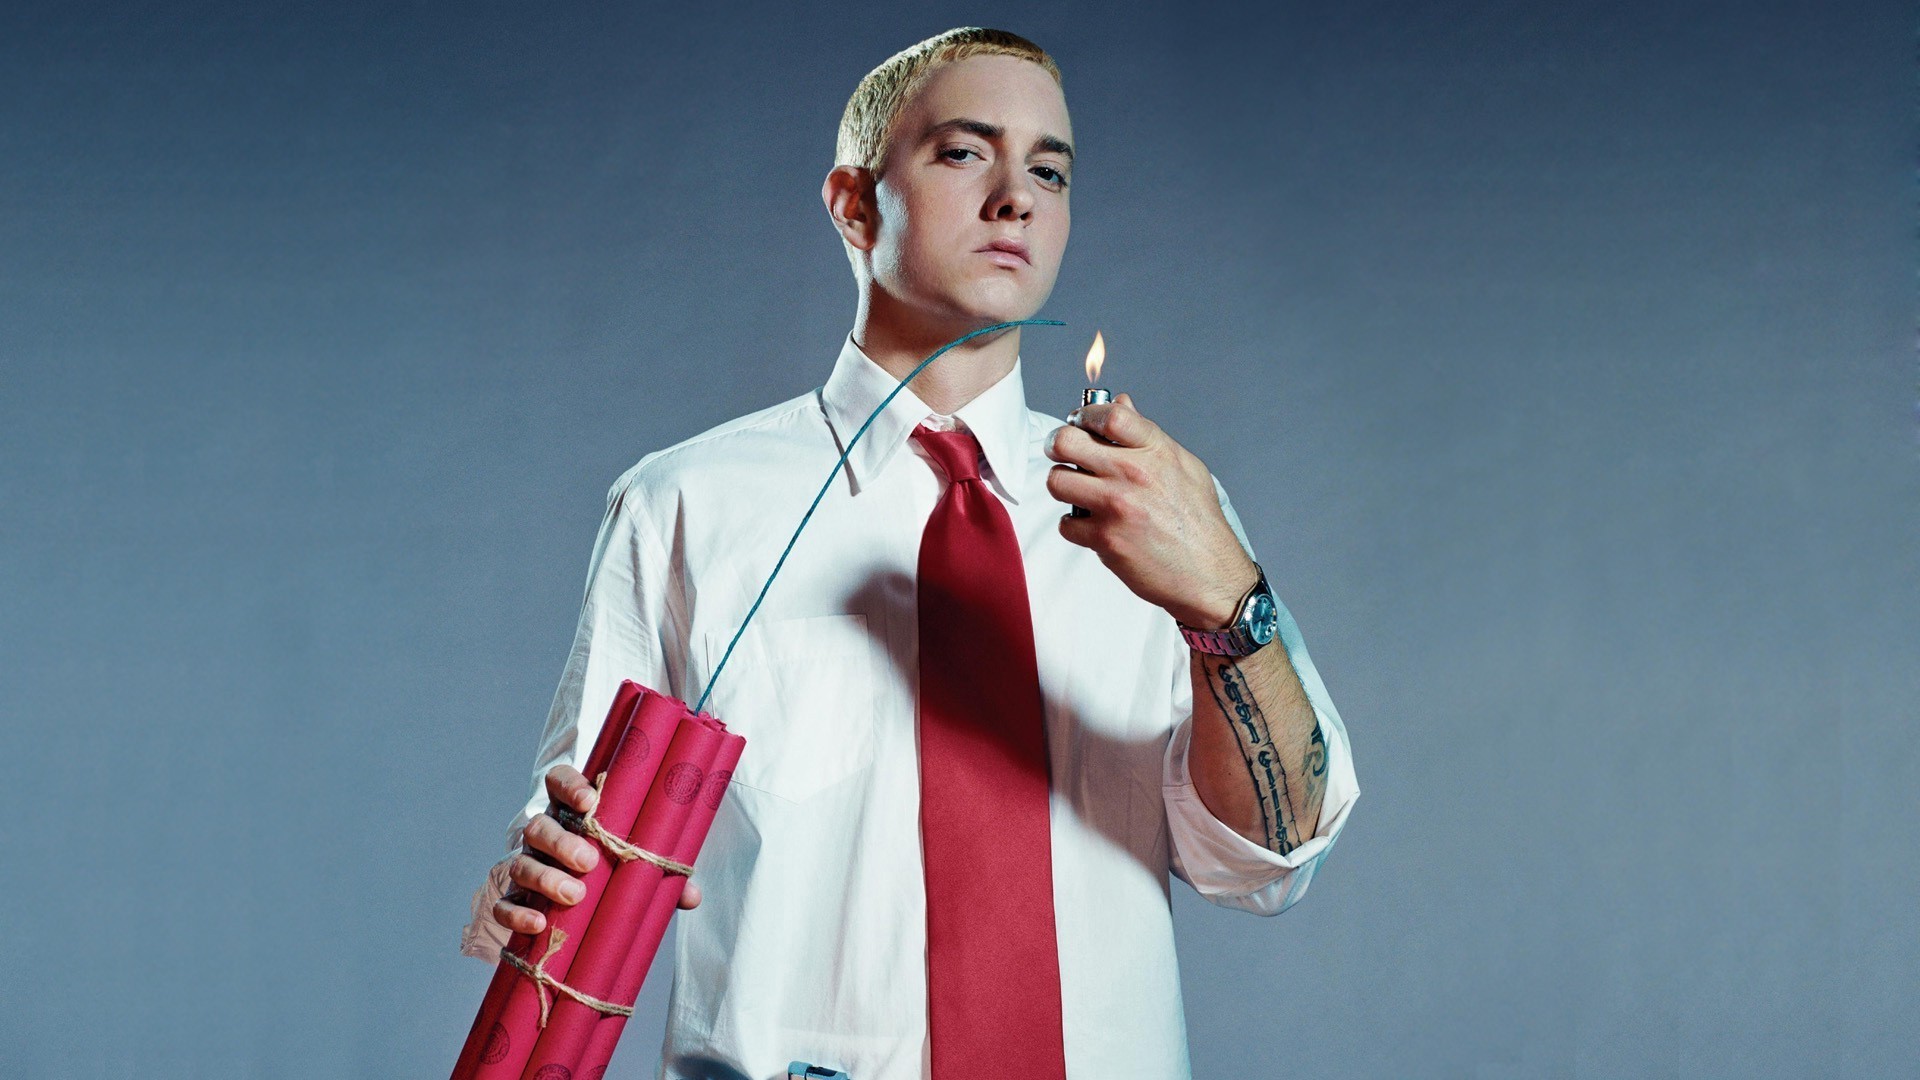 Eminem HD Wallpapers (81+ images)1920 x 1080